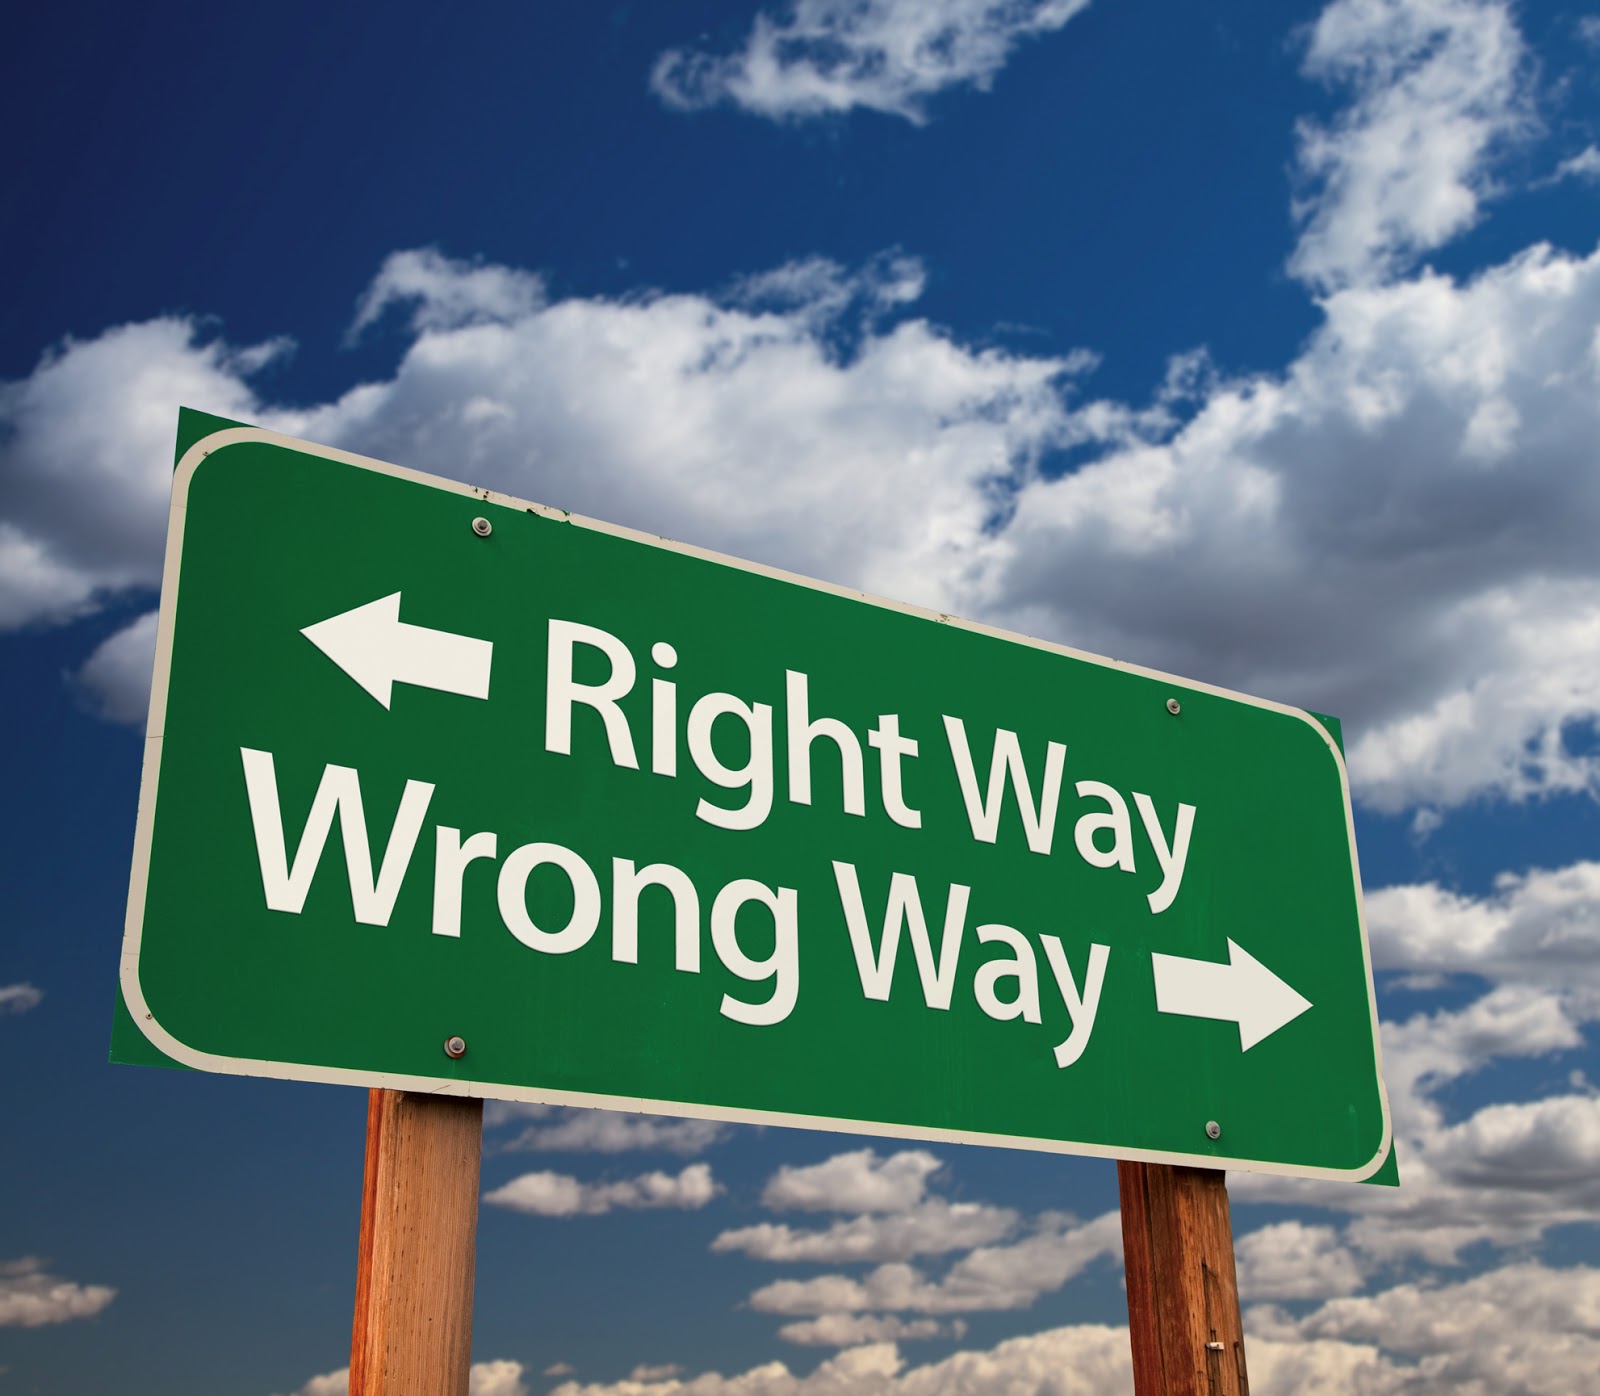 Bioethics Discussion Blog: Right Way and Wrong Way: Making an ...